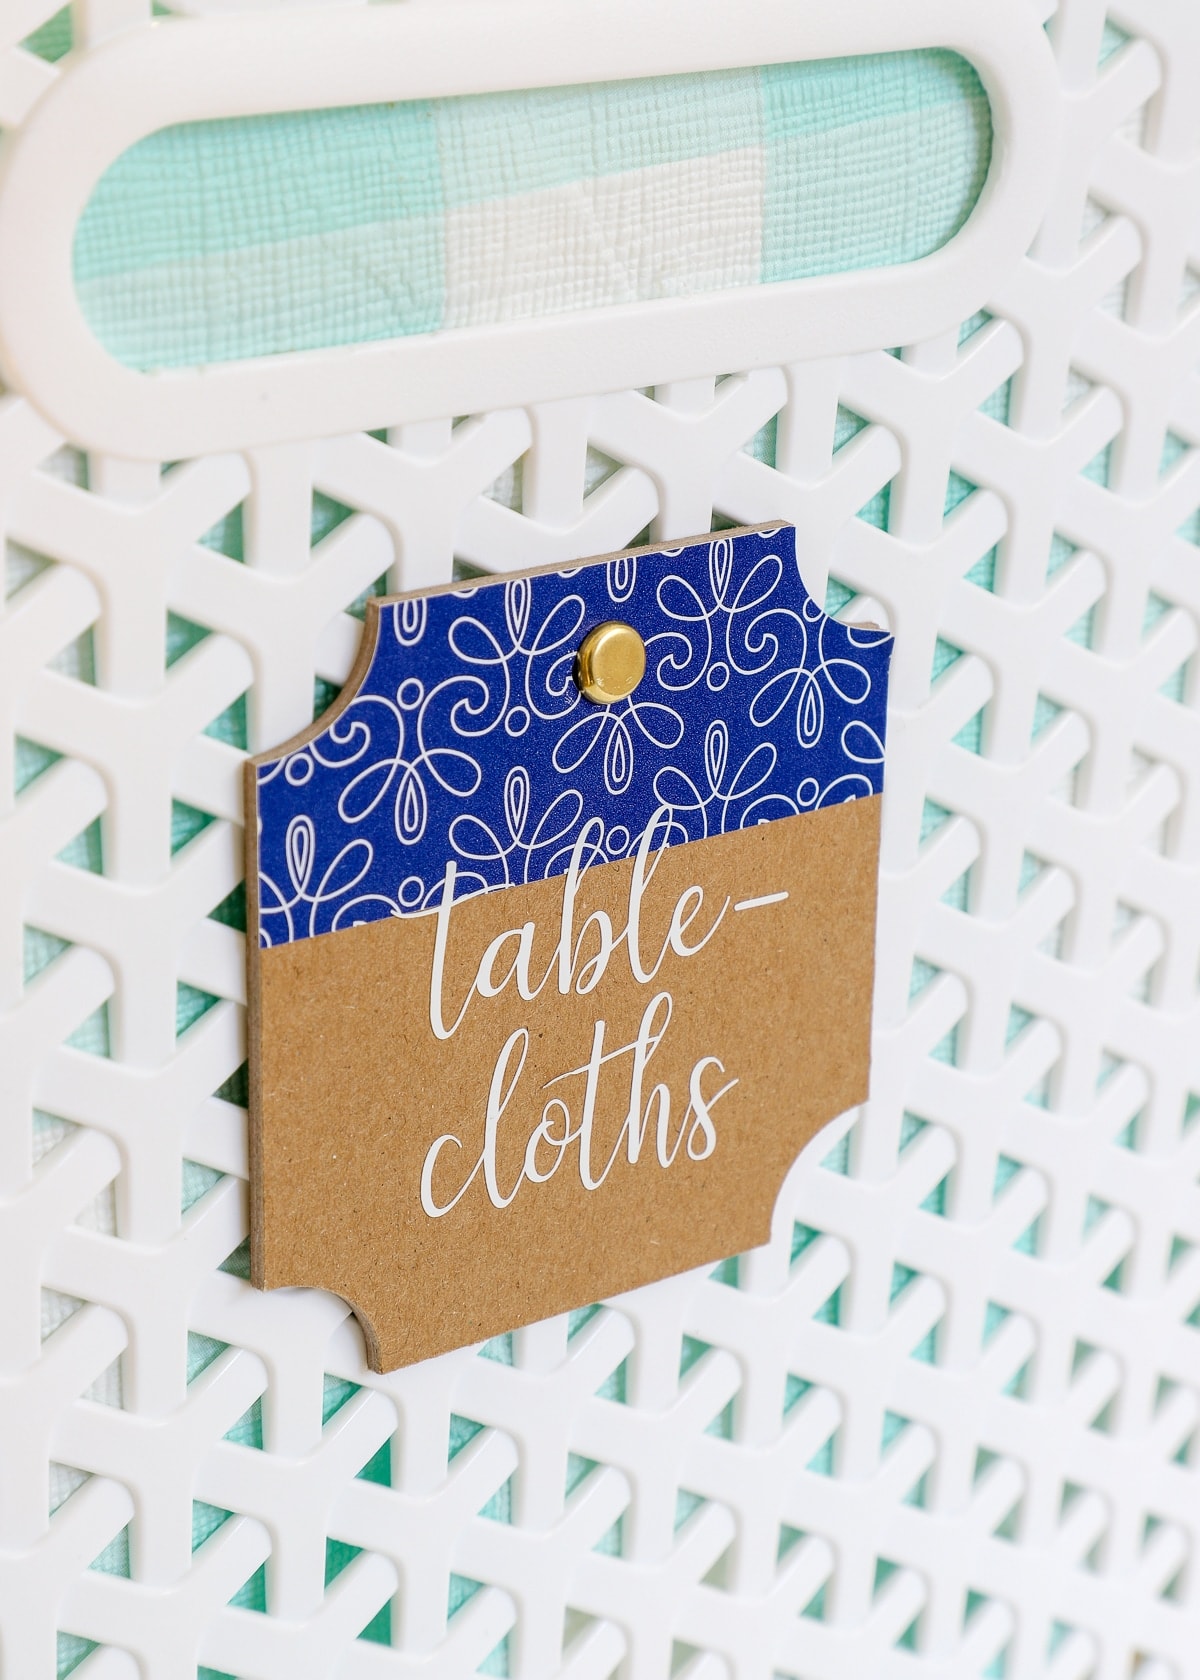 Label made with patterned vinyl